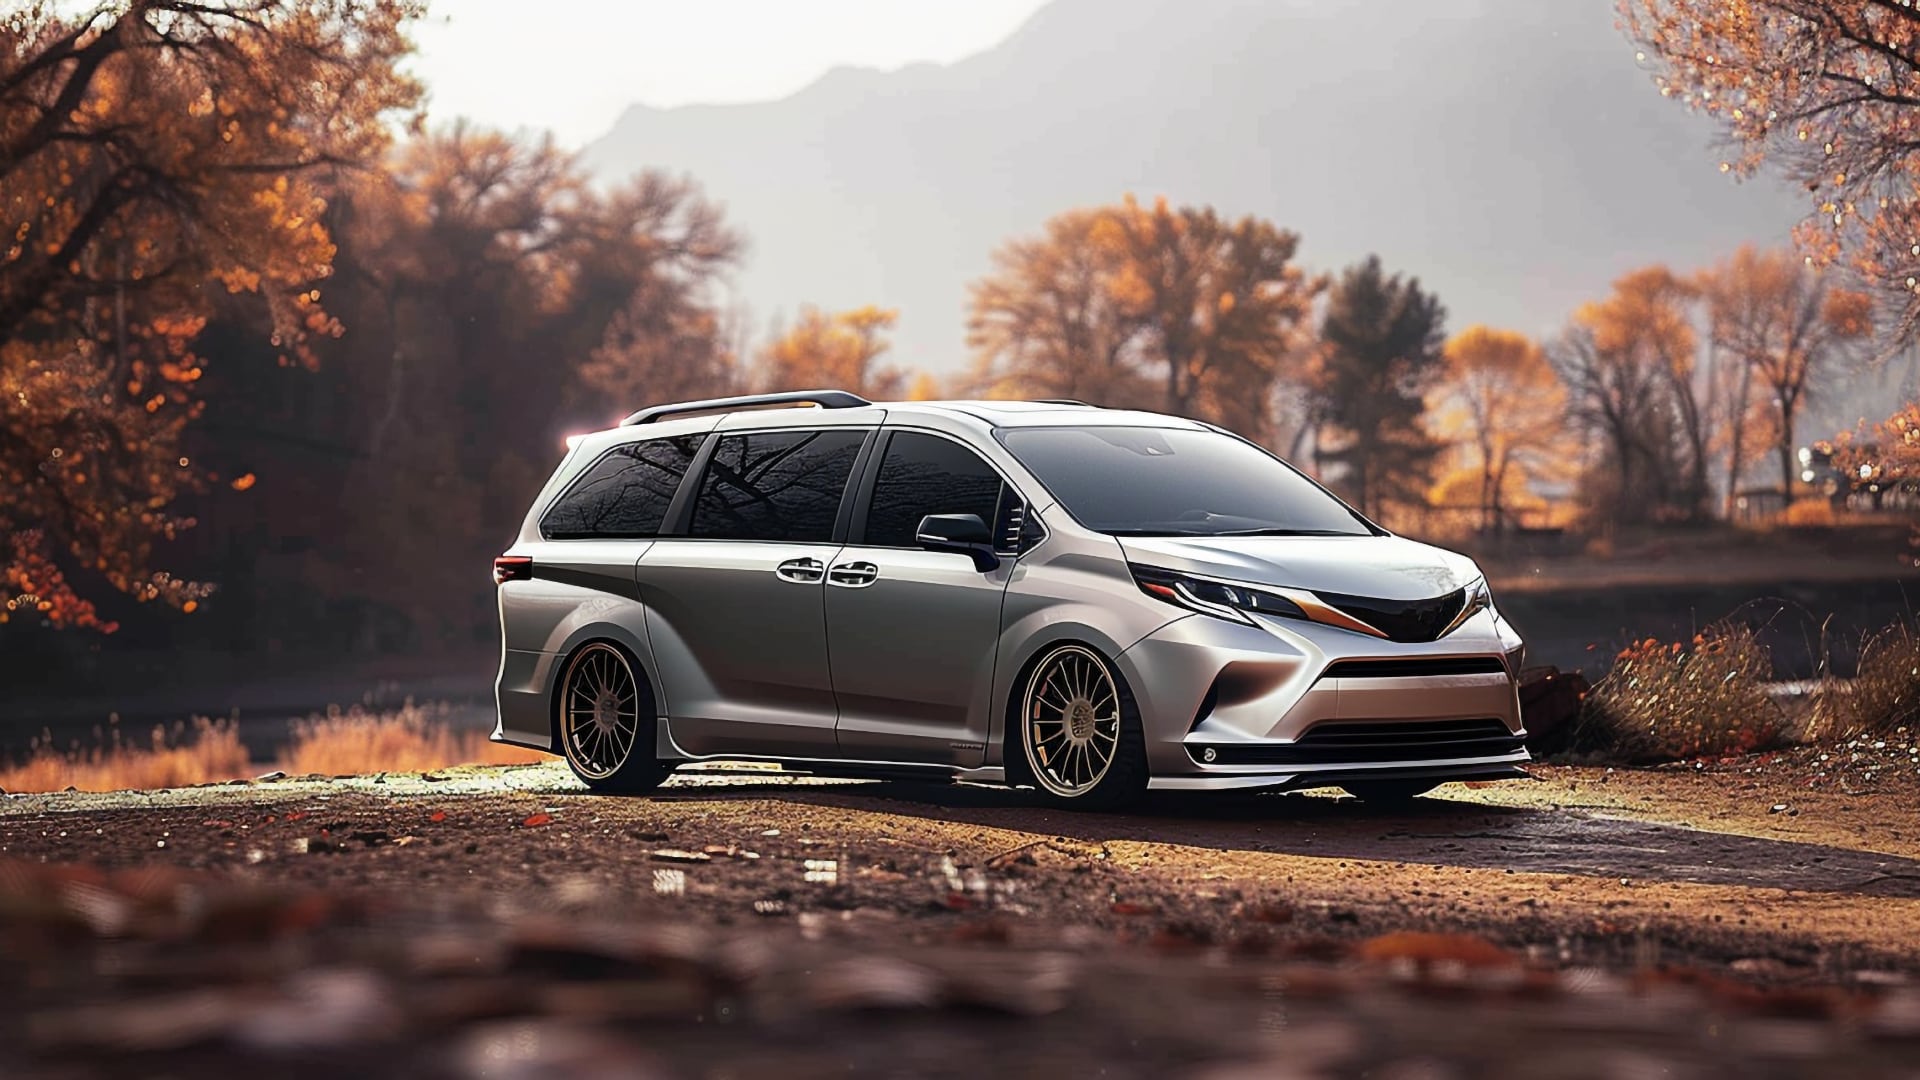 A silver Toyota Sienna, a model from the years to avoid, is parked on the side of a road.